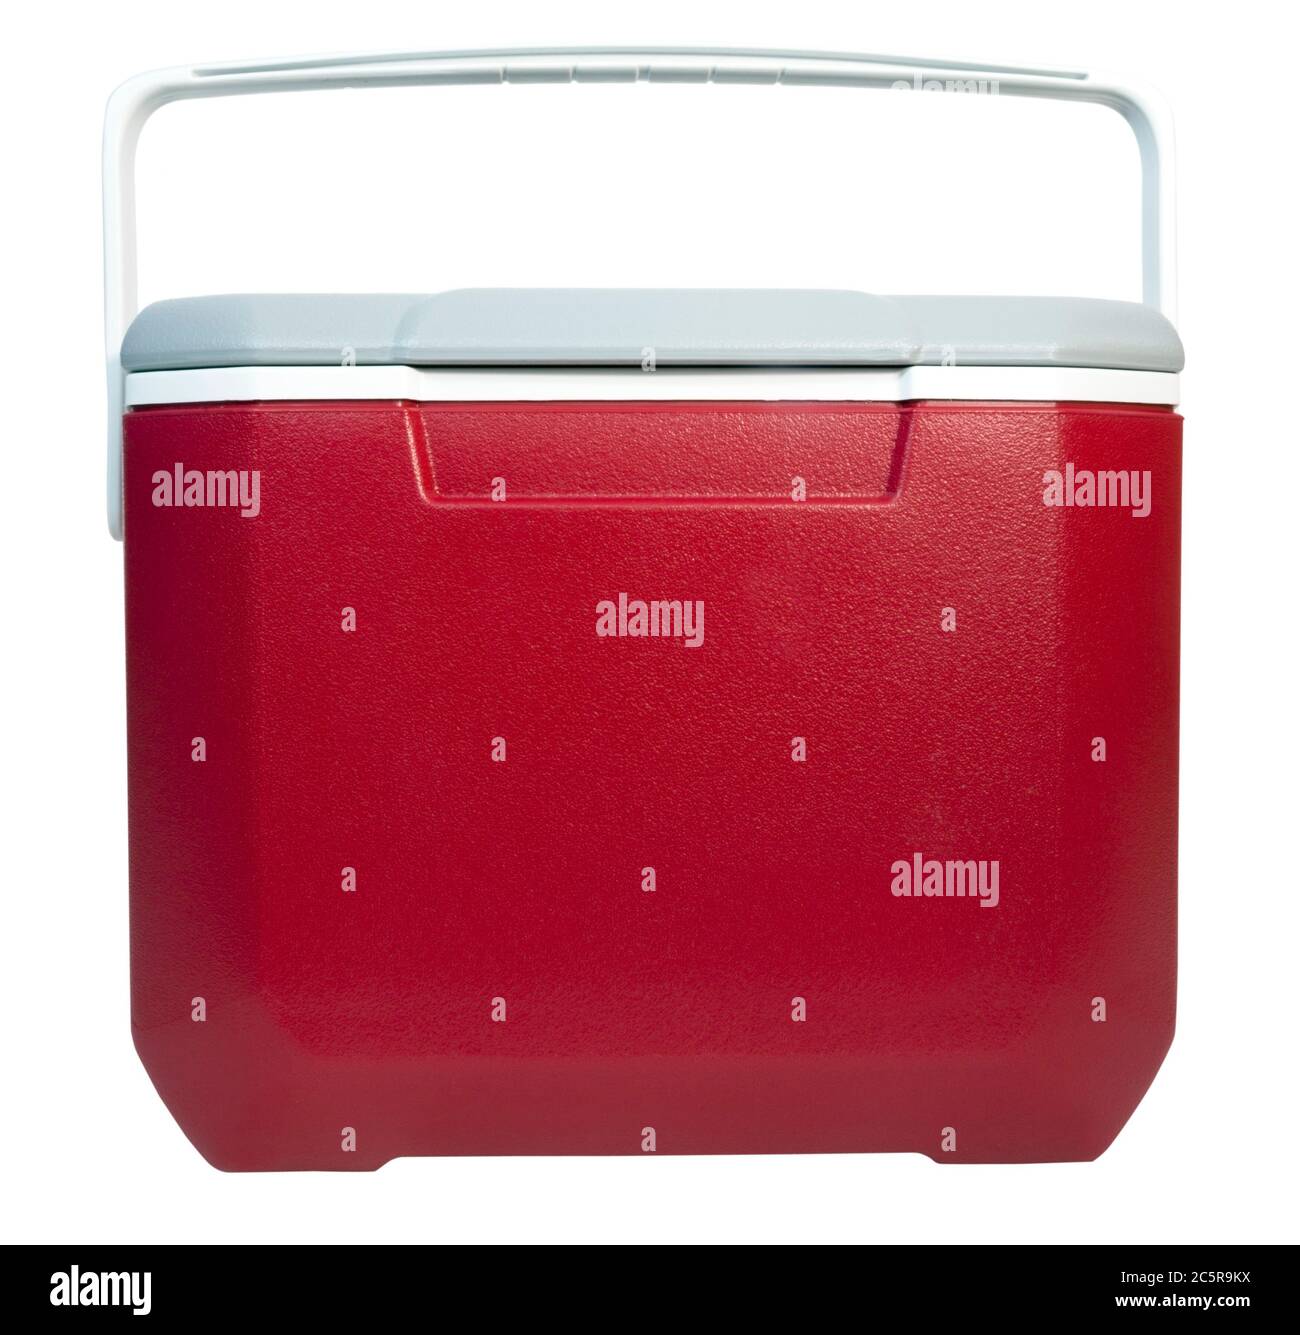 Front view of closed of red and white plastic food and drink cooler. Isolated. Stock Photo